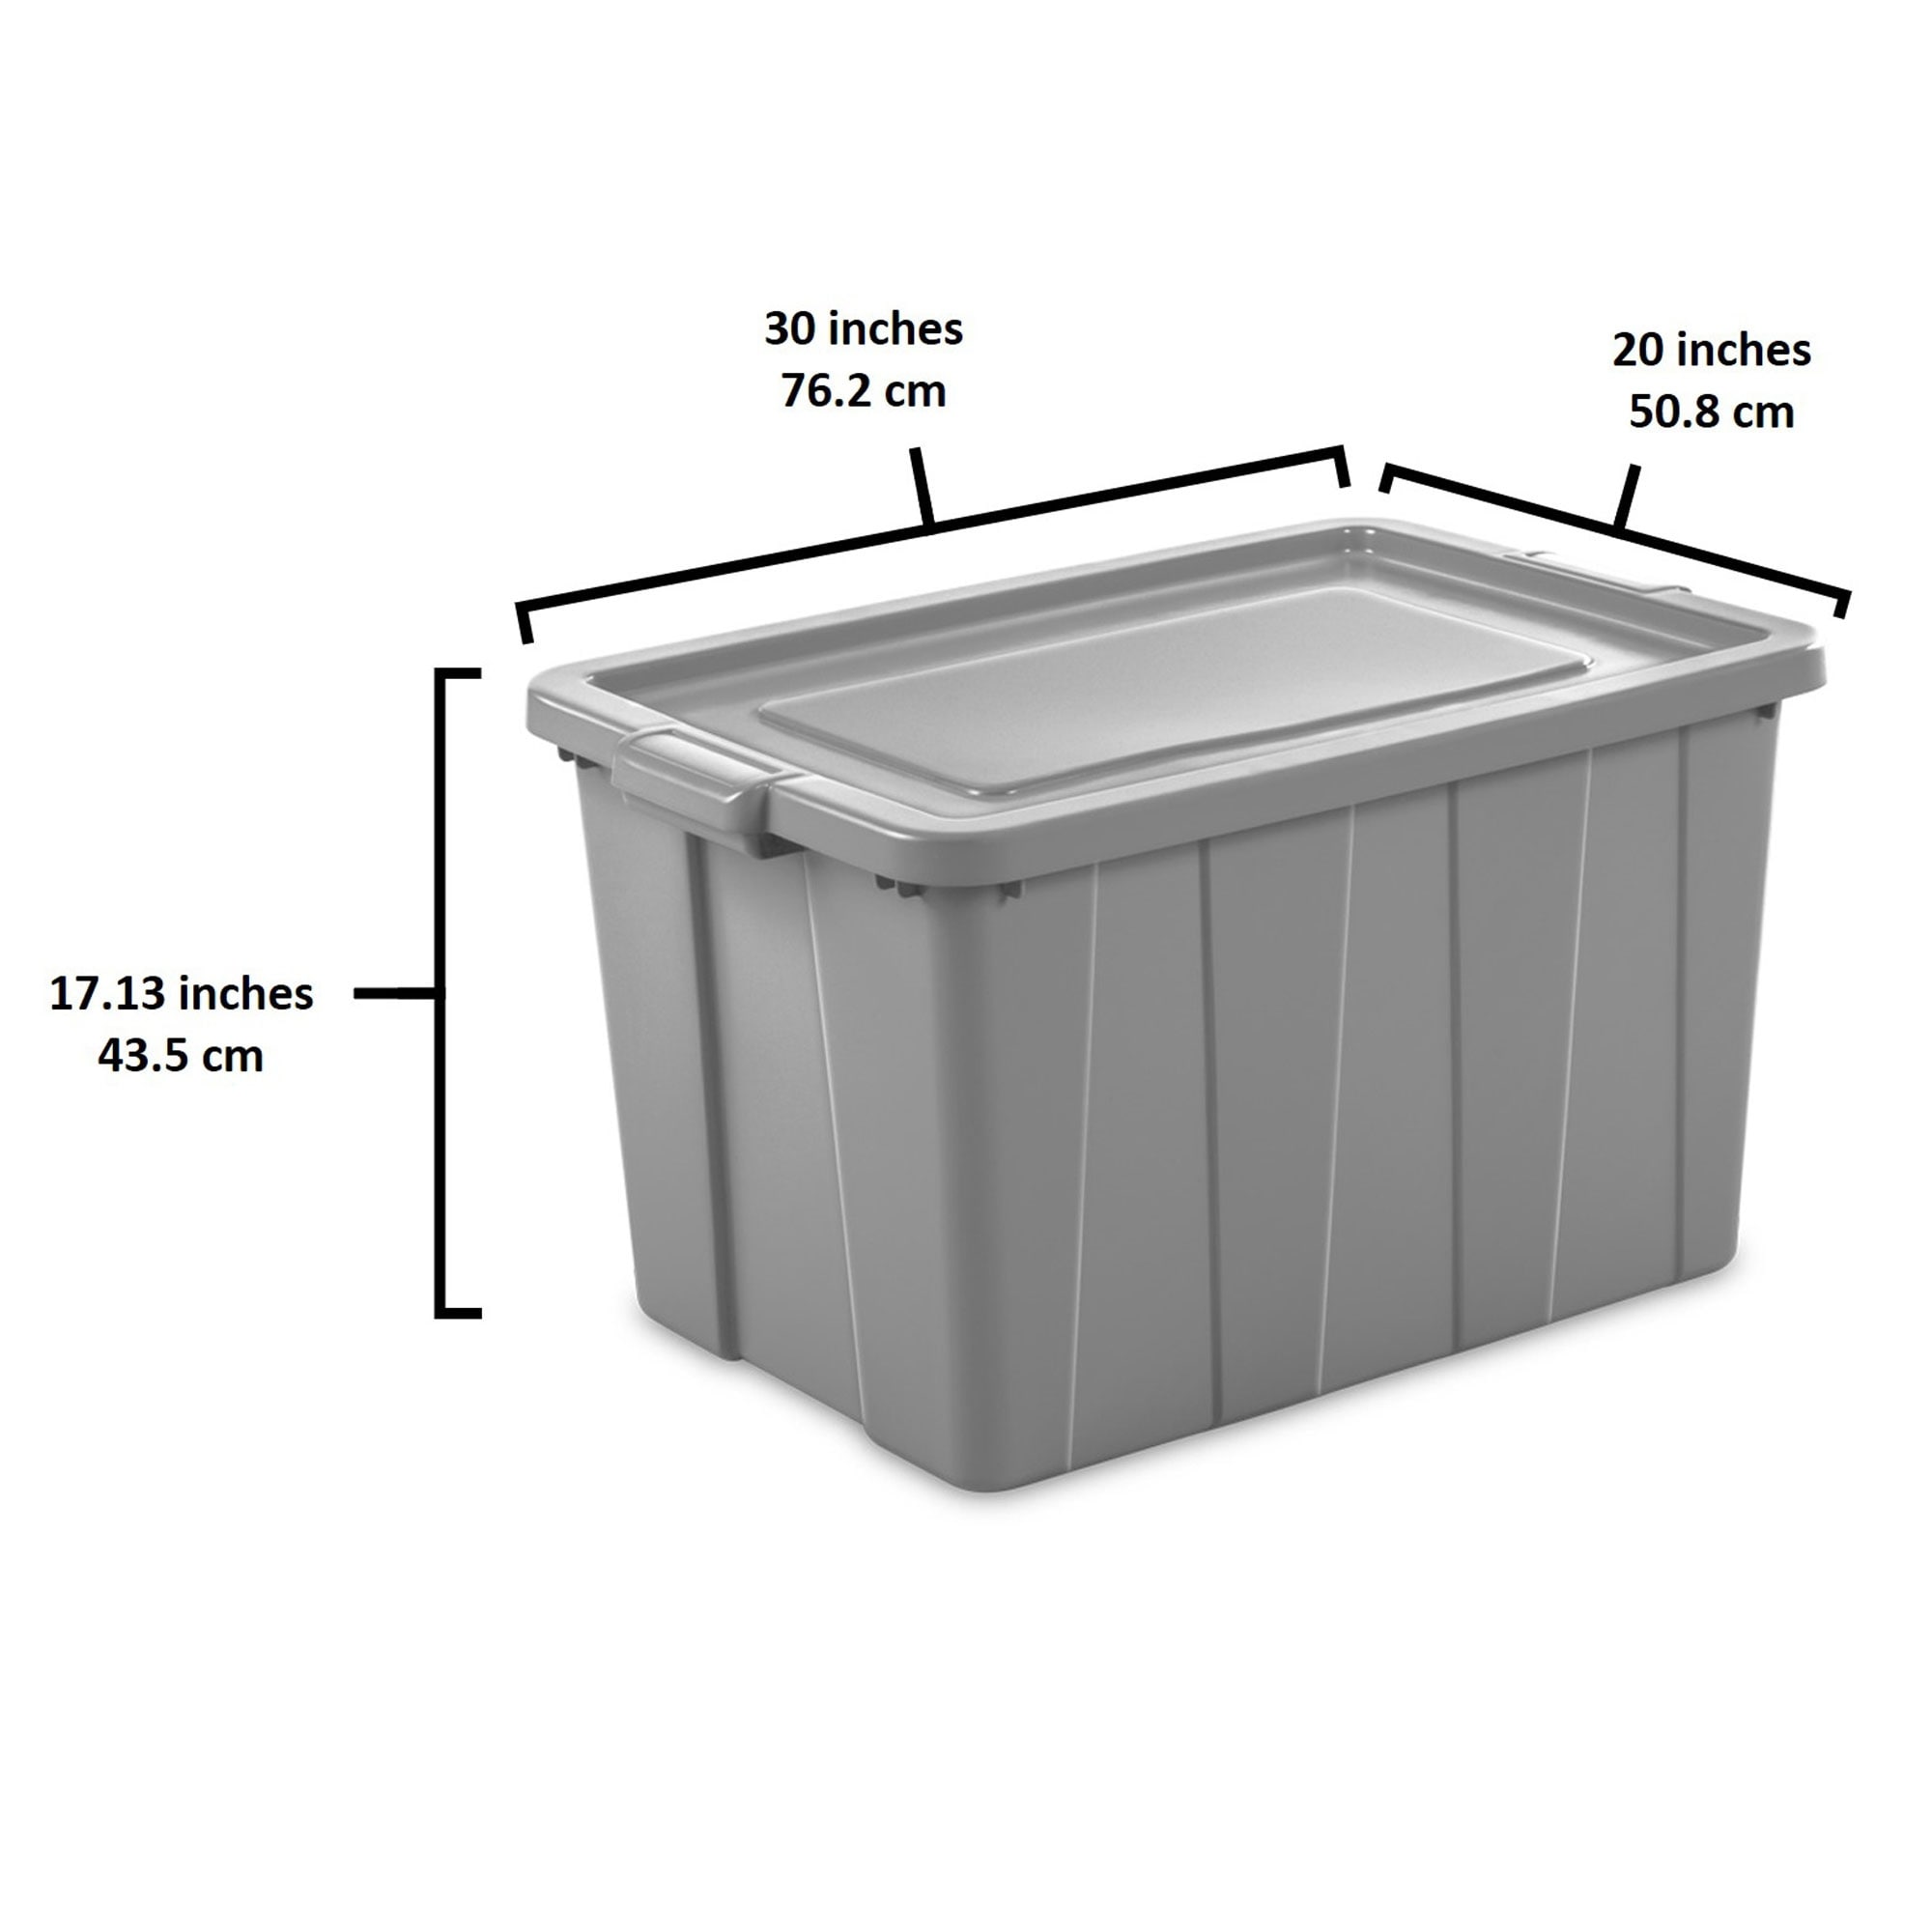 https://ak1.ostkcdn.com/images/products/is/images/direct/dae0568c12ca92988f2cb42b5186c0a720399076/Sterilite-Tuff1-30-Gallon-Plastic-Storage-Tote-Container-Bin-with-Lid-%2812-Pack%29.jpg